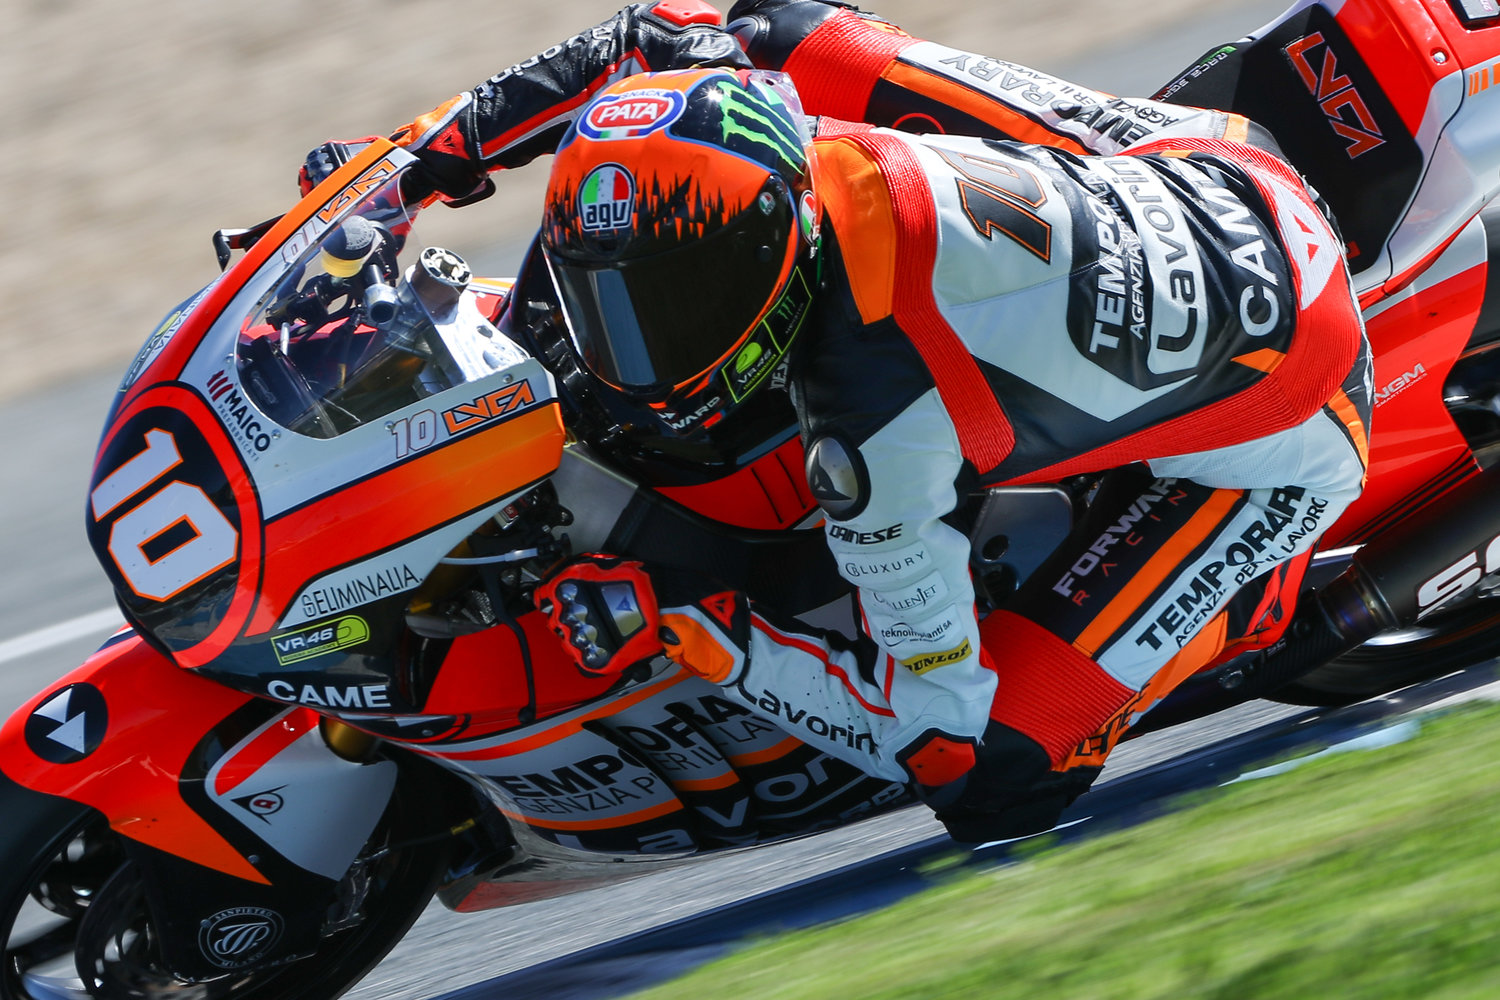 Marini progresses further during first official test in 2017